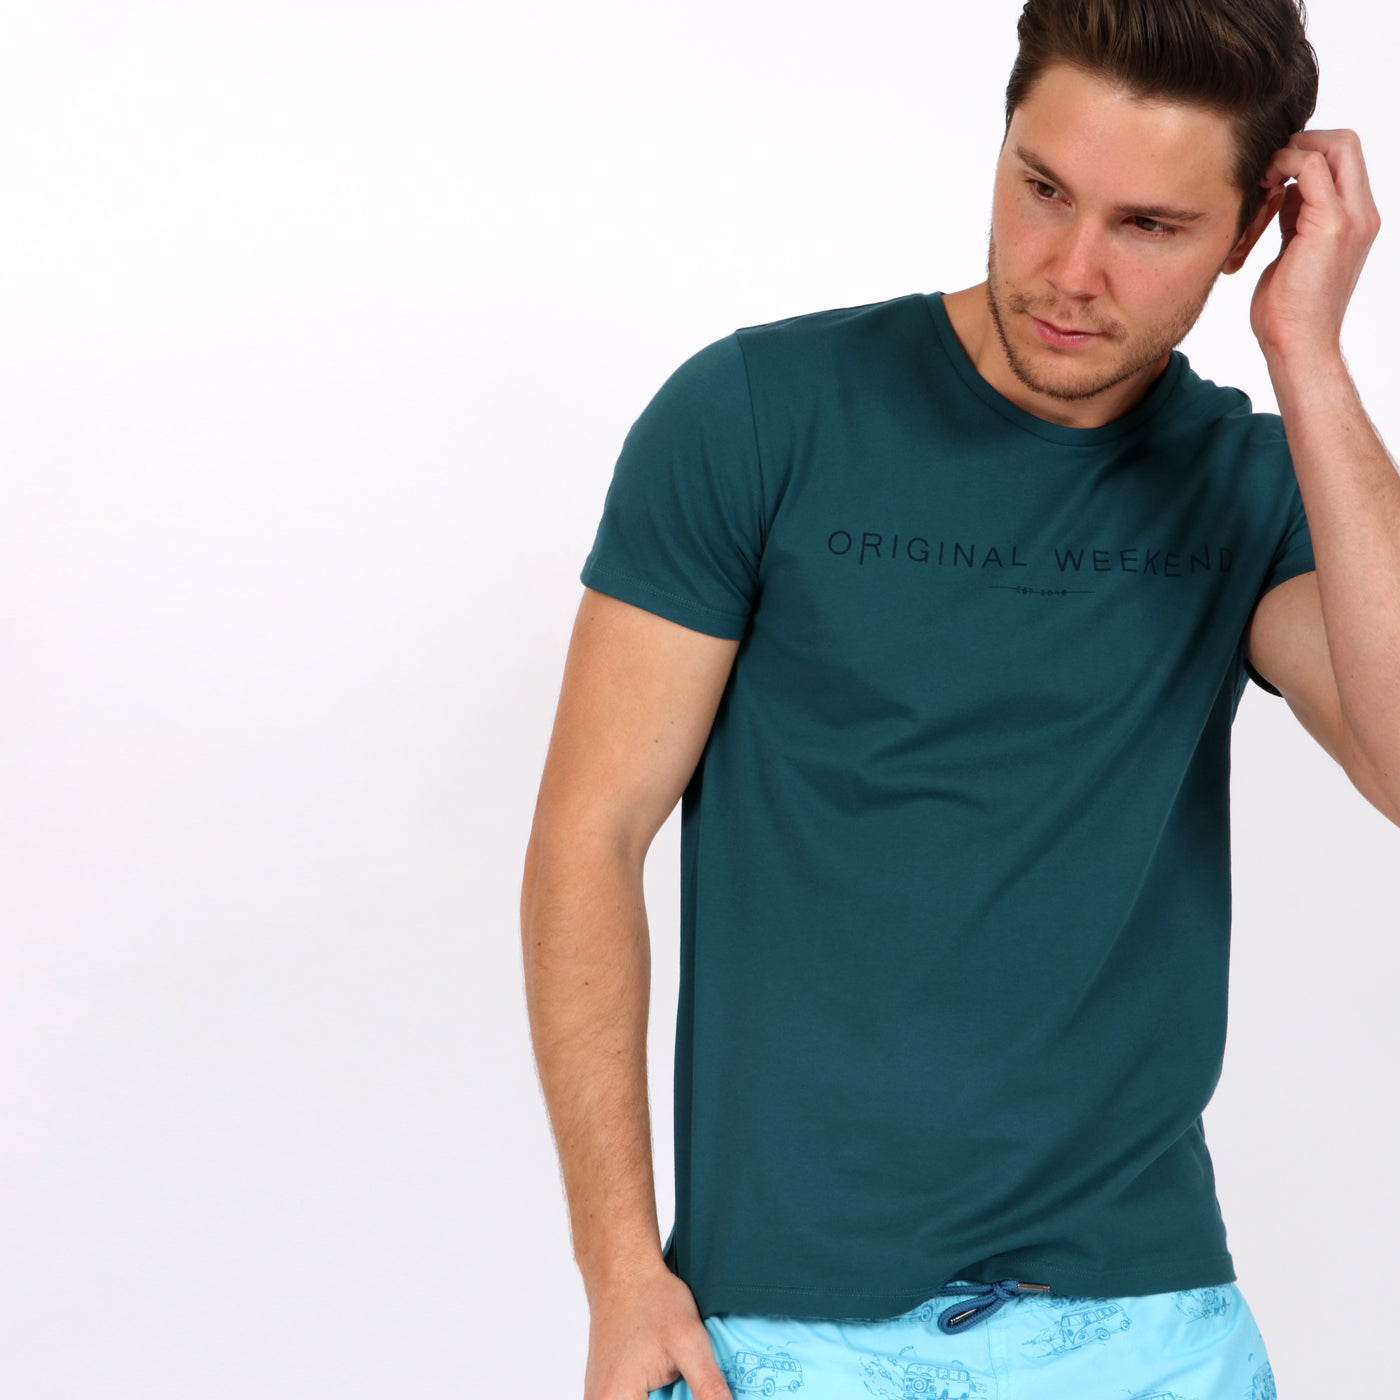 OWTS1802 Atlantic Green men's organic cotton t-shirt with logo print on body front view styled